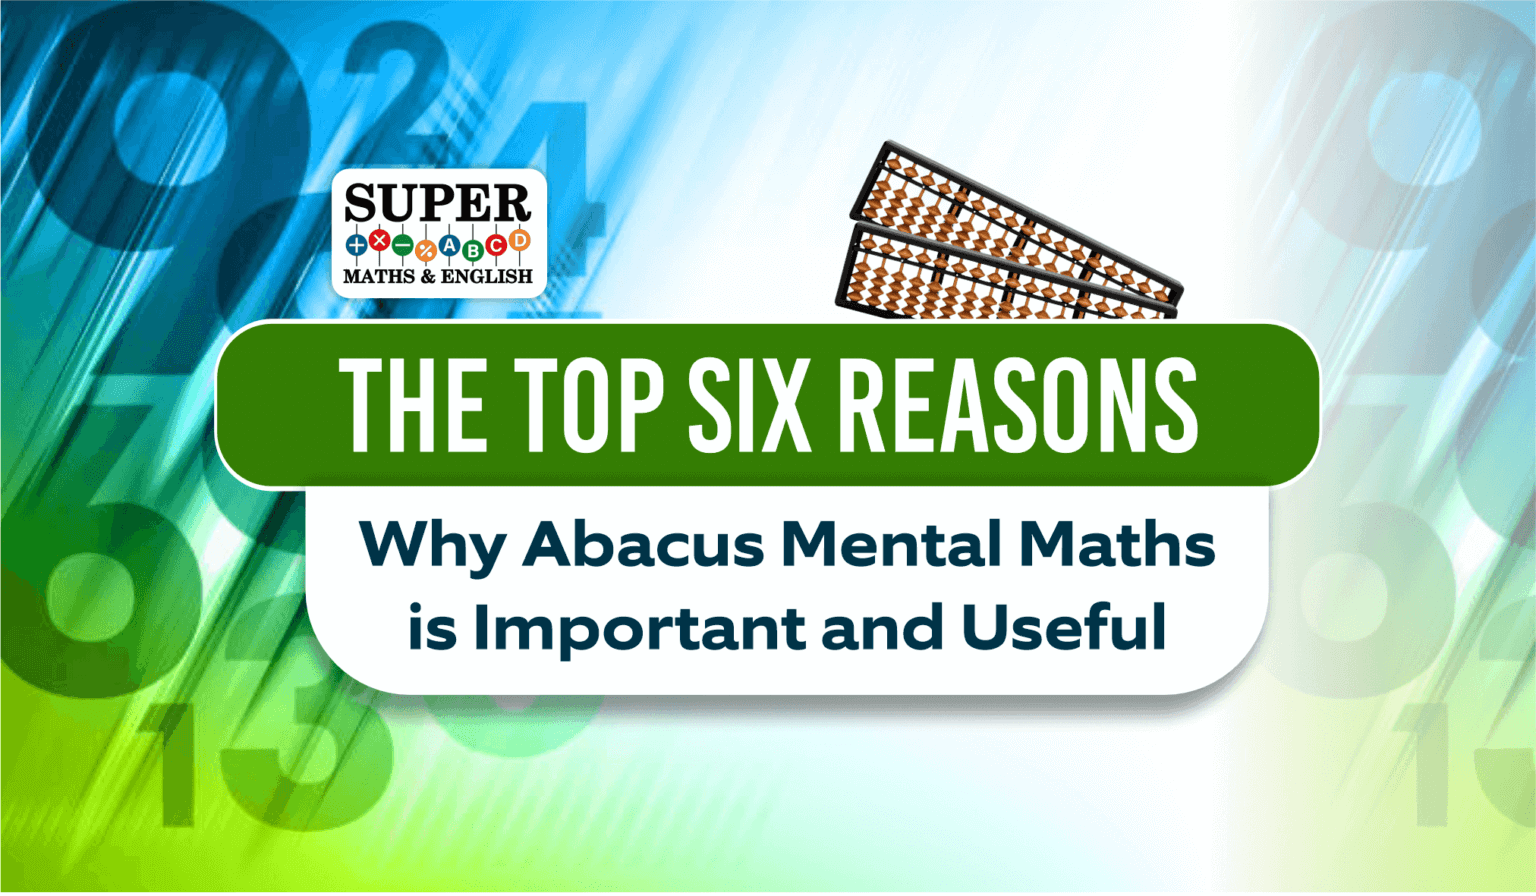 Abacus Mental Maths is Important | Supermaths